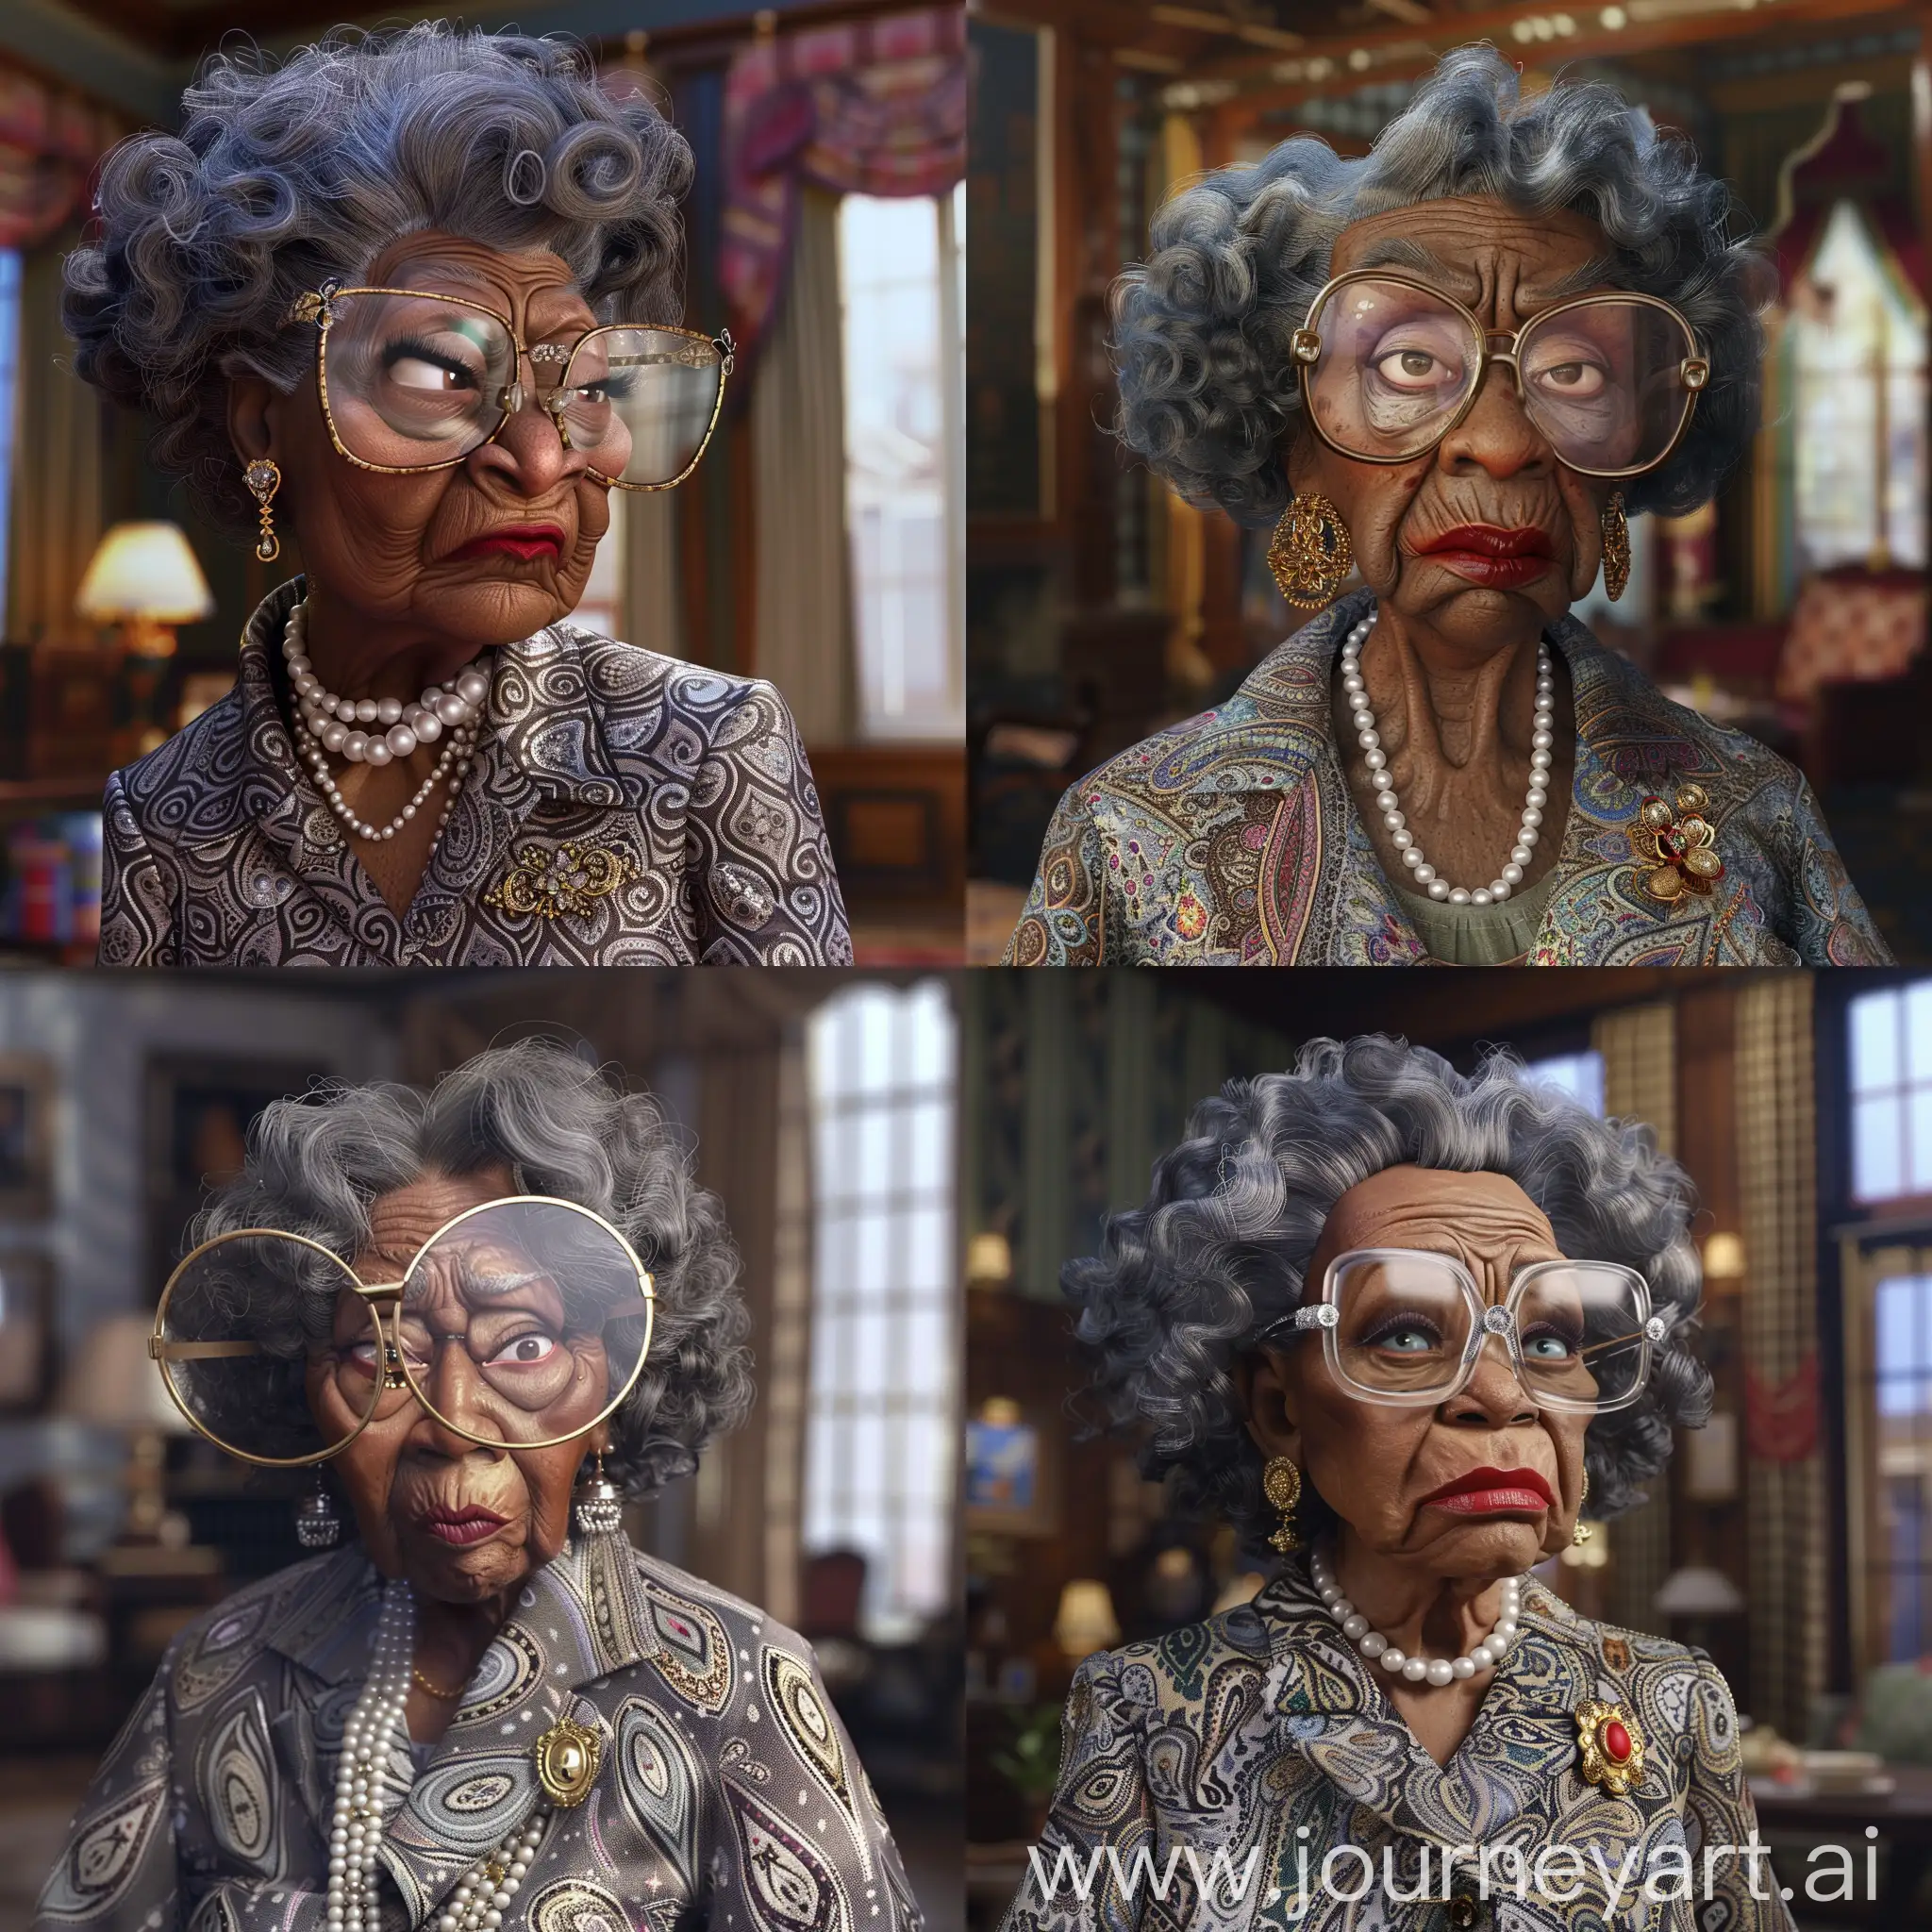 

An elderly woman, dark skin, gray curly hair, wearing large glasses with a transparent frame, serious expression, dressed in an elegant paisley-patterned coat, pearl necklace, gold brooch on the lapel, light makeup with red lipstick, in an indoor setting, , character Madea portrayed by Tyler Perry. Disney pixar cartoon style